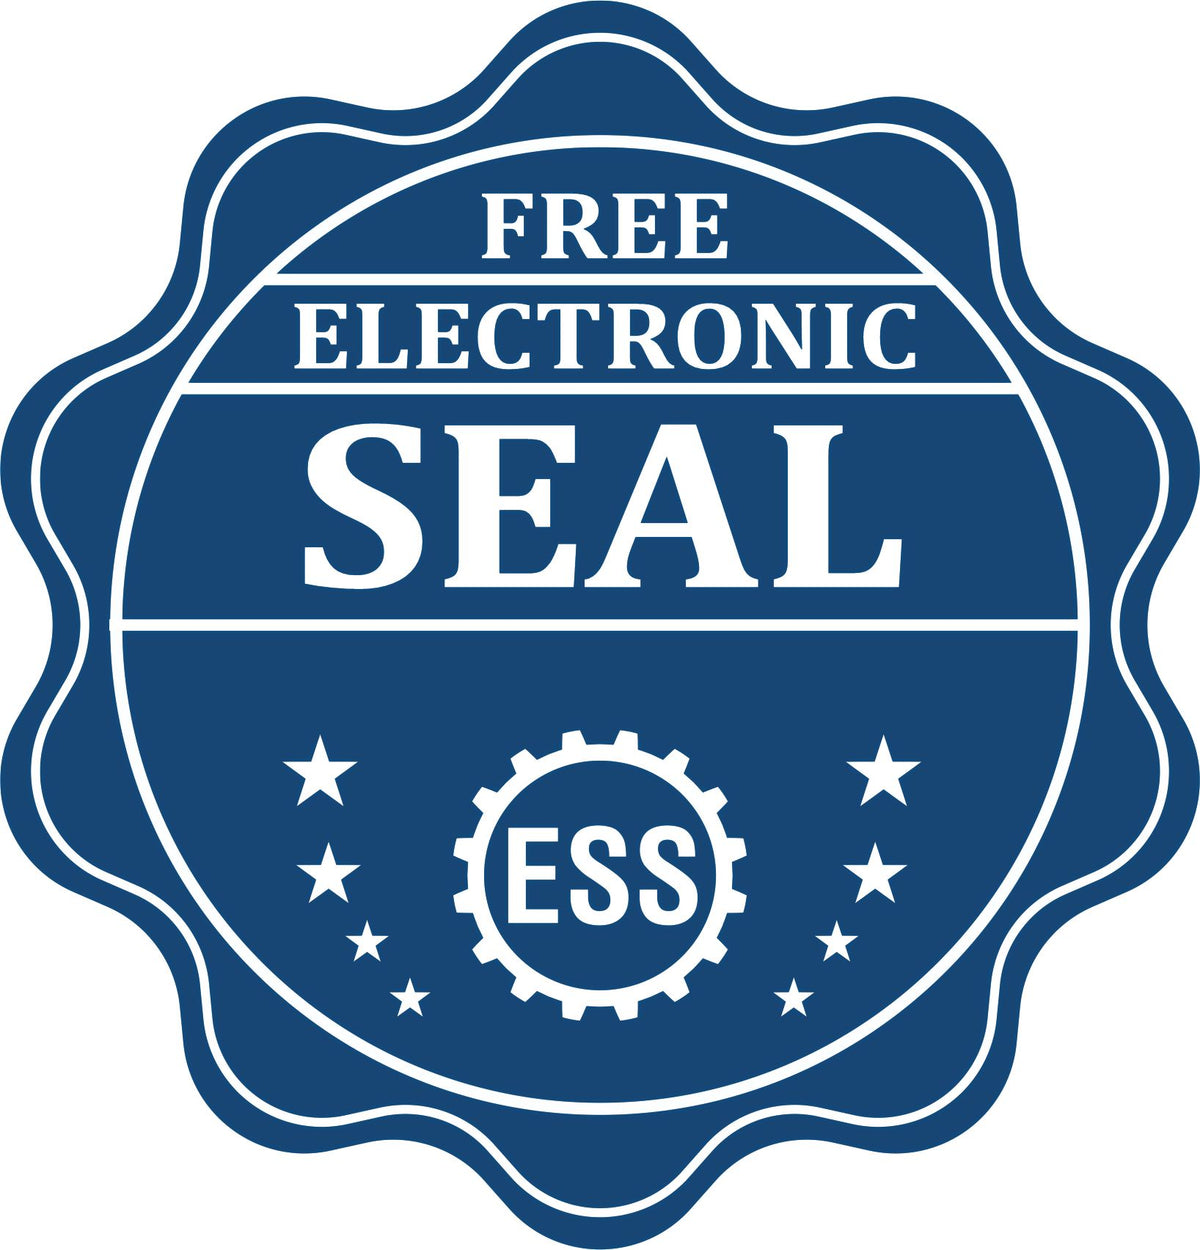 A badge showing a free electronic seal for the Heavy-Duty South Dakota Rectangular Notary Stamp with stars and the ESS gear on the emblem.